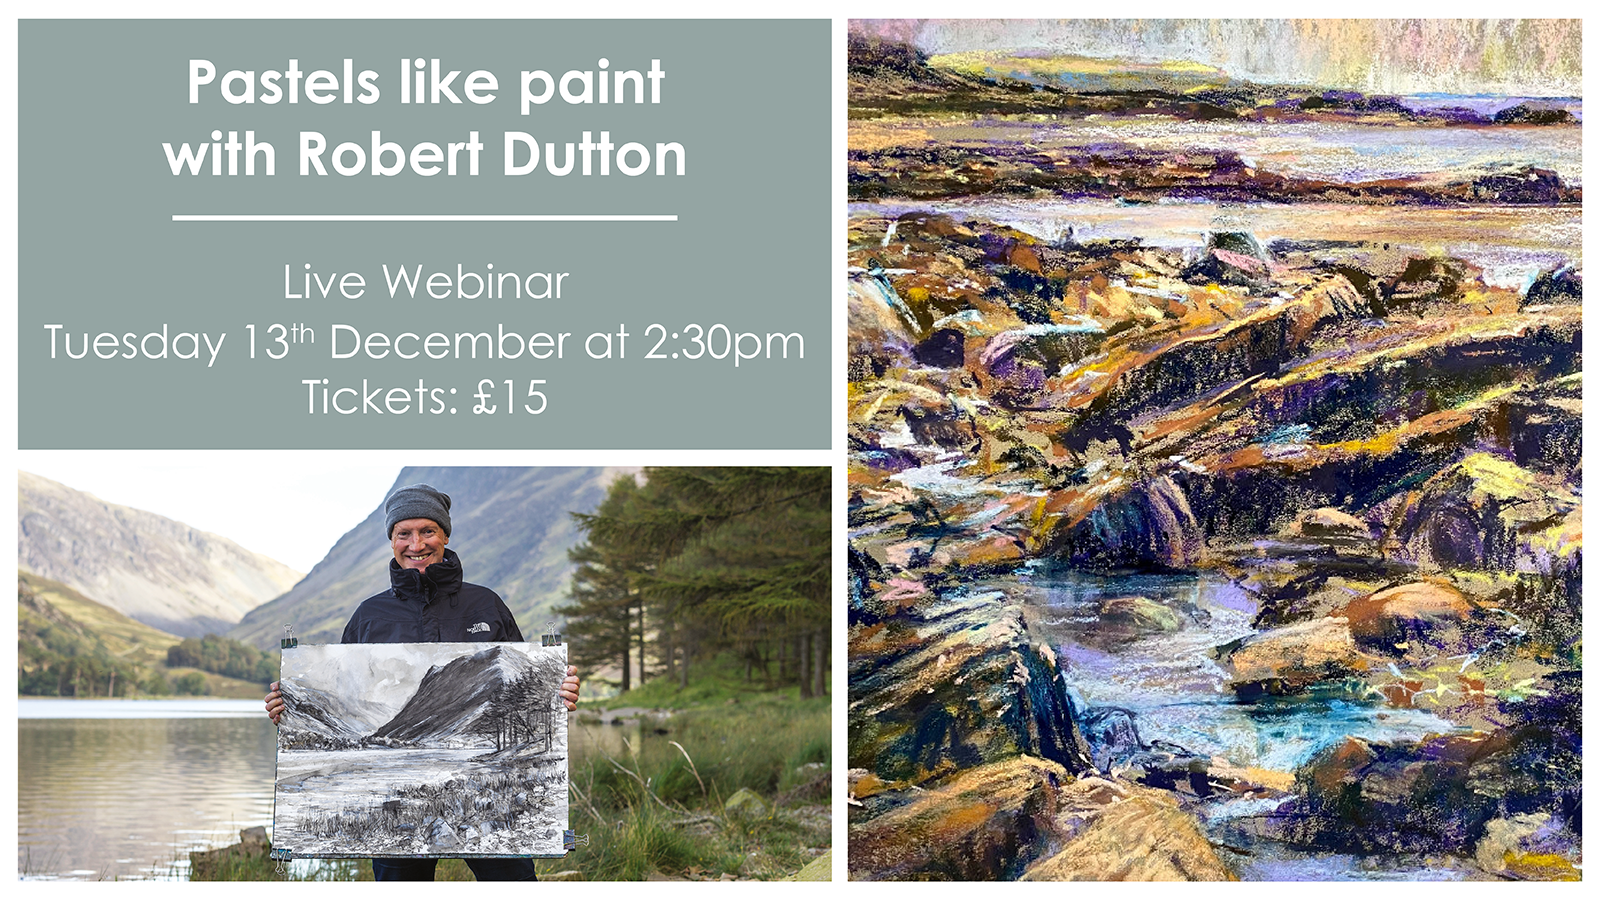 Pastels like Paint with Robert Dutton